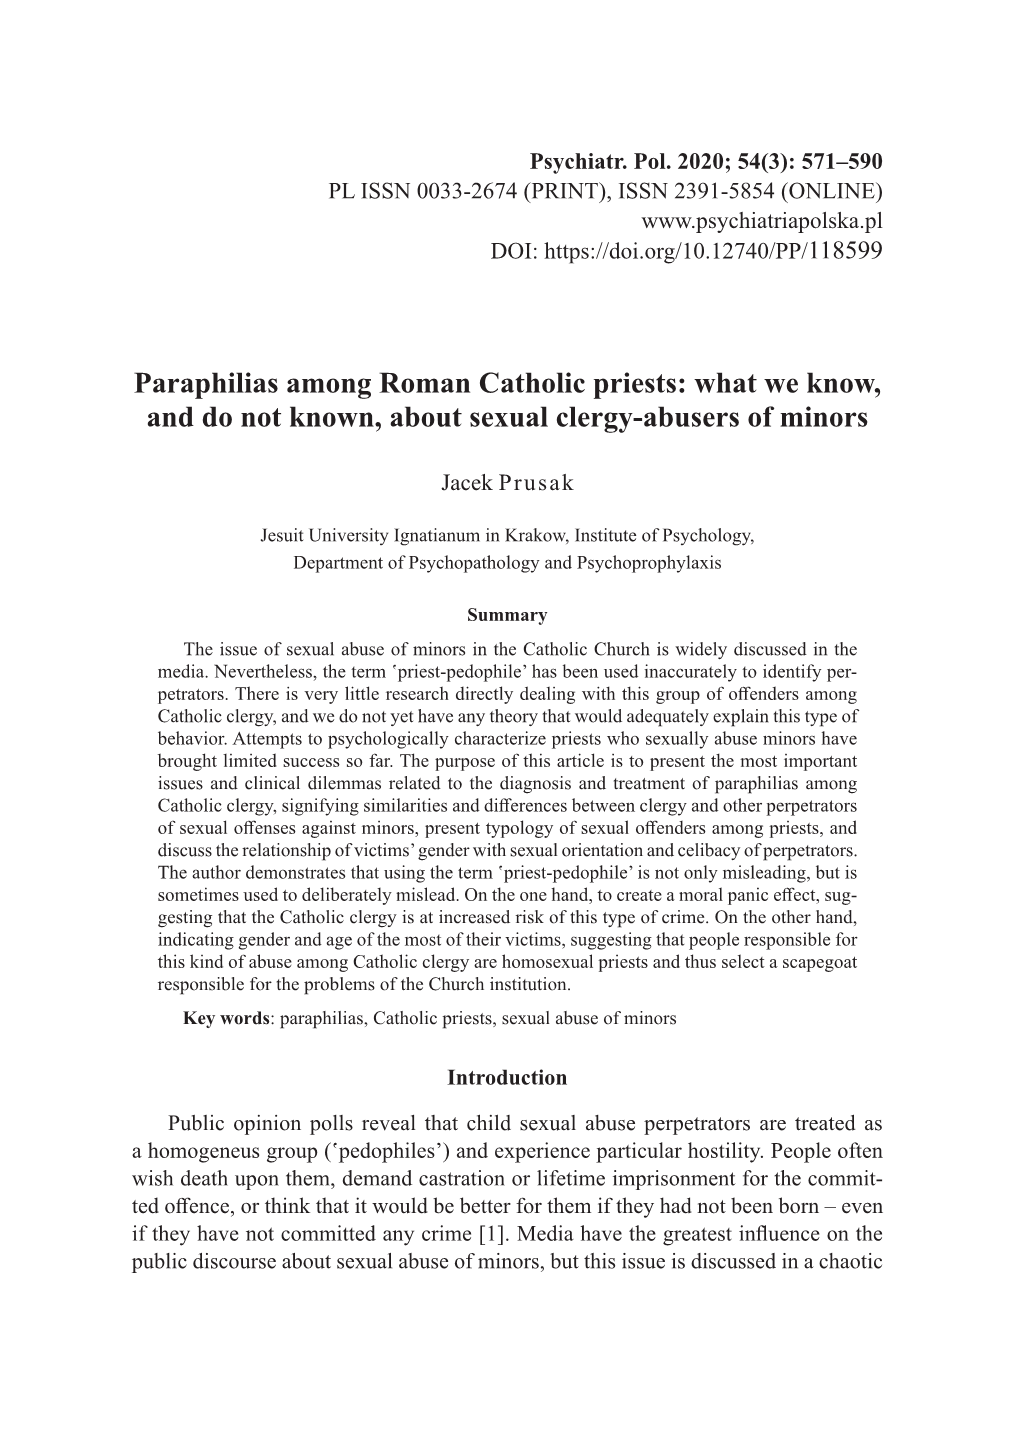 Paraphilias Among Roman Catholic Priests: What We Know, and Do Not Known, About Sexual Clergy-Abusers of Minors